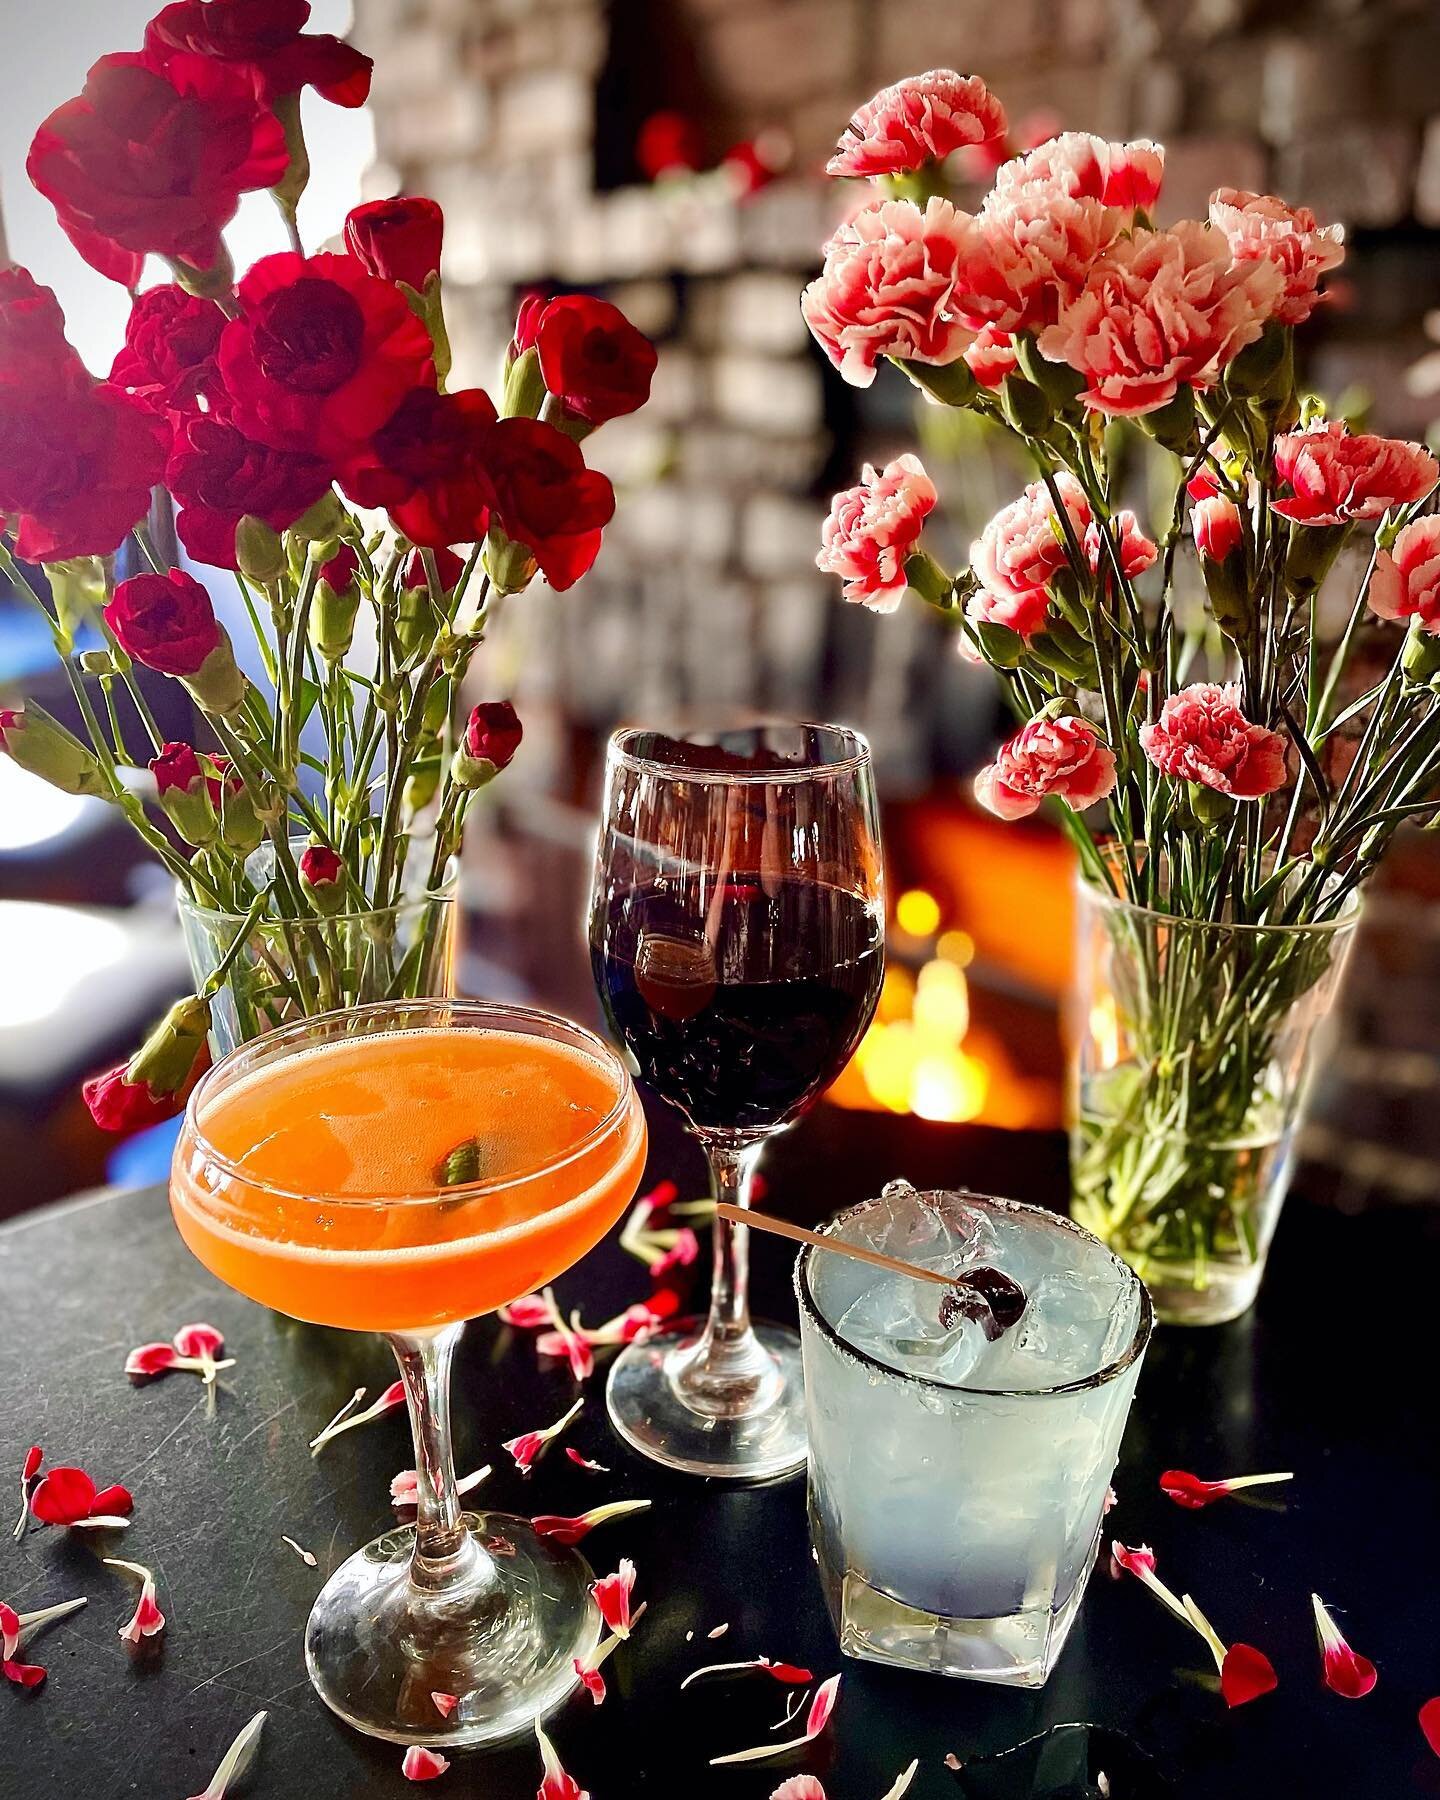 You know where to cozy up this Valentine&rsquo;s Day&hellip;

#valentinesday #nobhill #cocktails #fireplace #roses